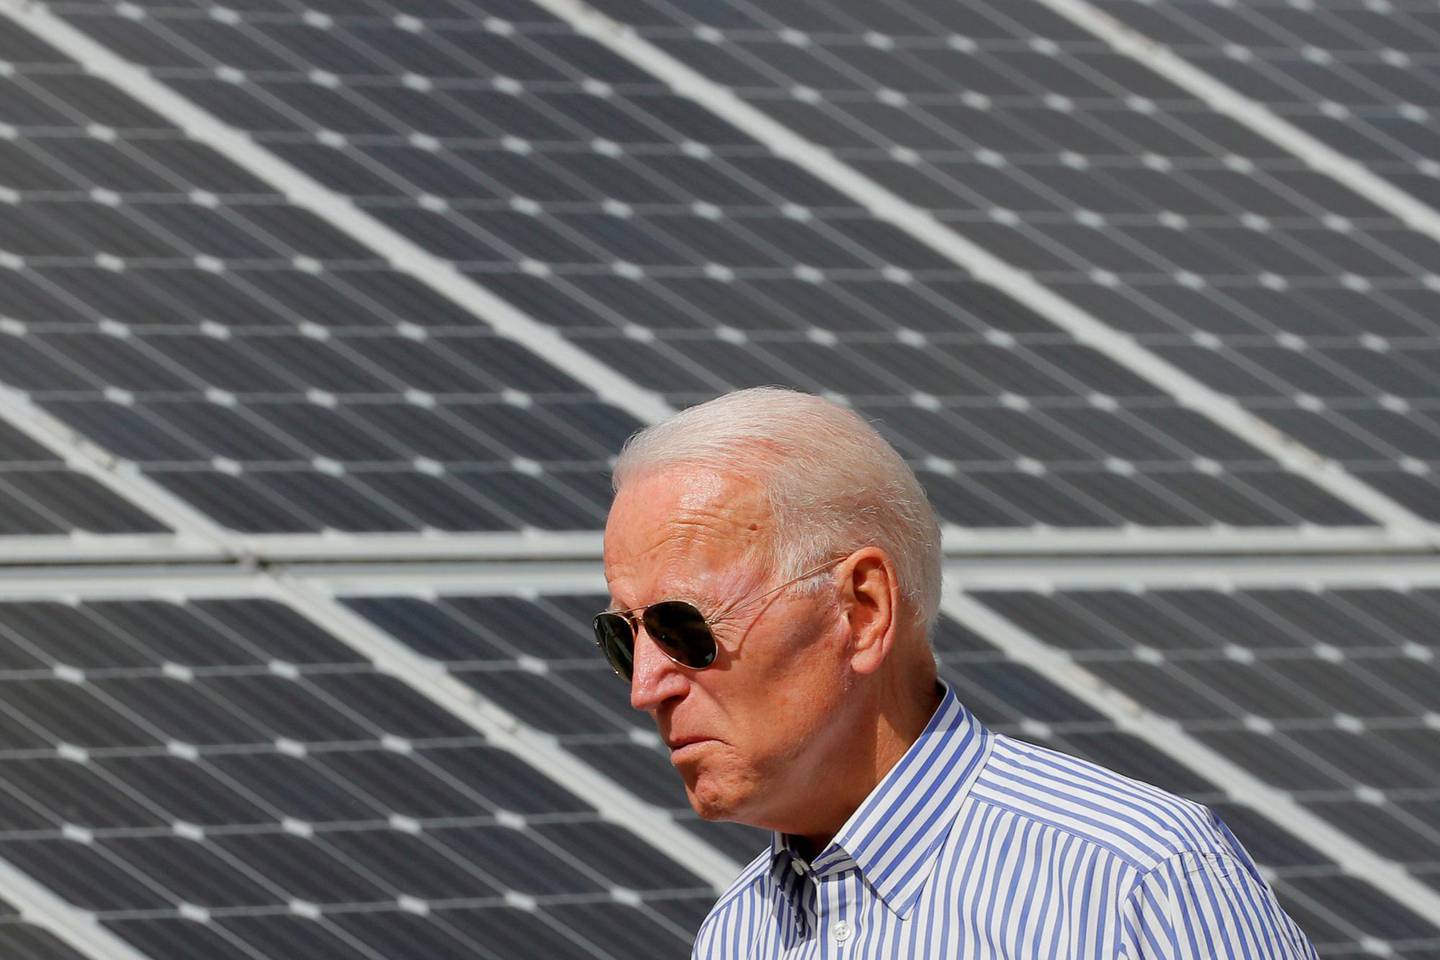 FILE PHOTO: Democratic 2020 U.S. presidential candidate and former Vice President Joe Biden walks past solar panels while touring the Plymouth Area Renewable Energy Initiative in Plymouth, New Hampshire, U.S., June 4, 2019.   REUTERS/Brian Snyder/File Photo/File Photo